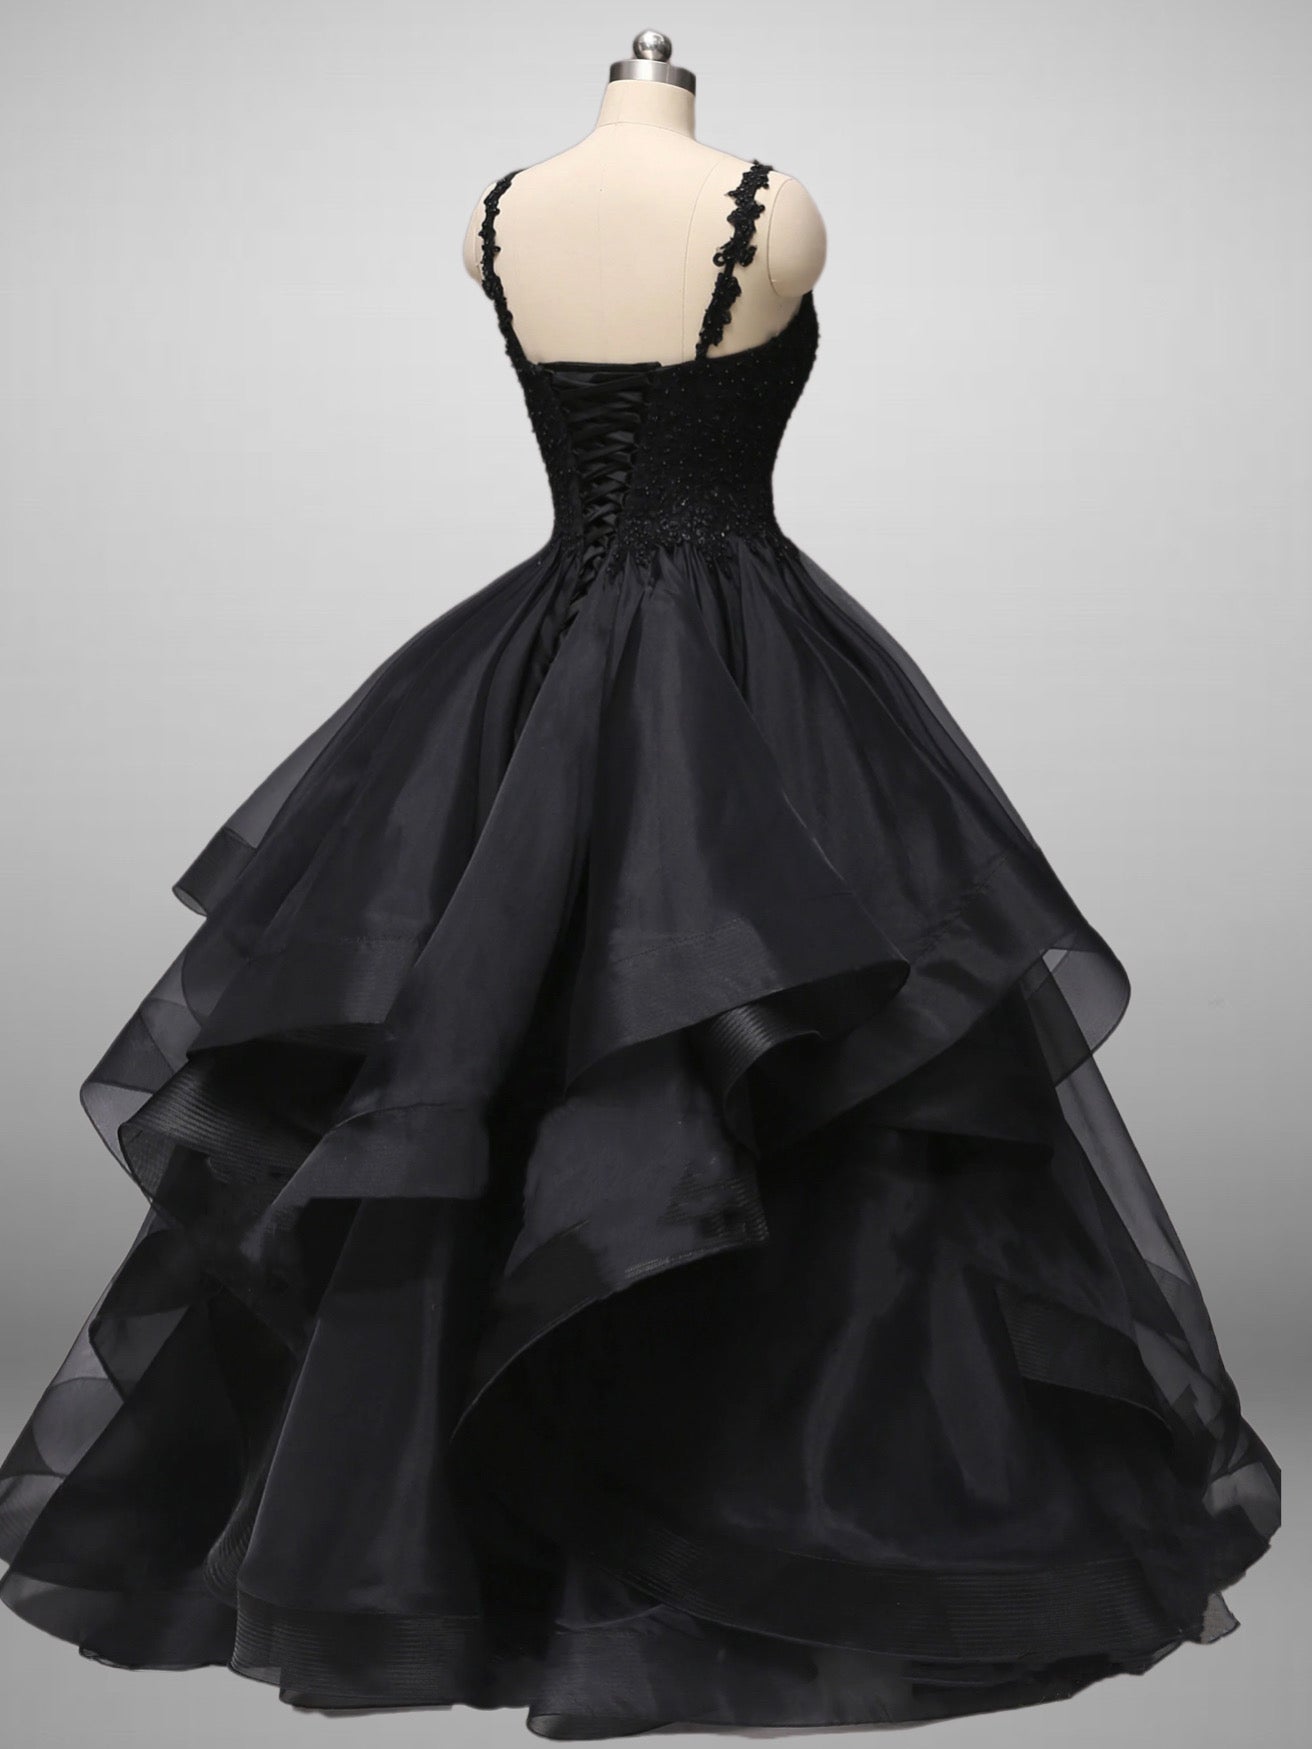 Classic Gothic Black Lace Embroidered A-Line Formal Dress With Ruffle Skirt Spaghetti Straps Plus Size - WonderlandByLilian